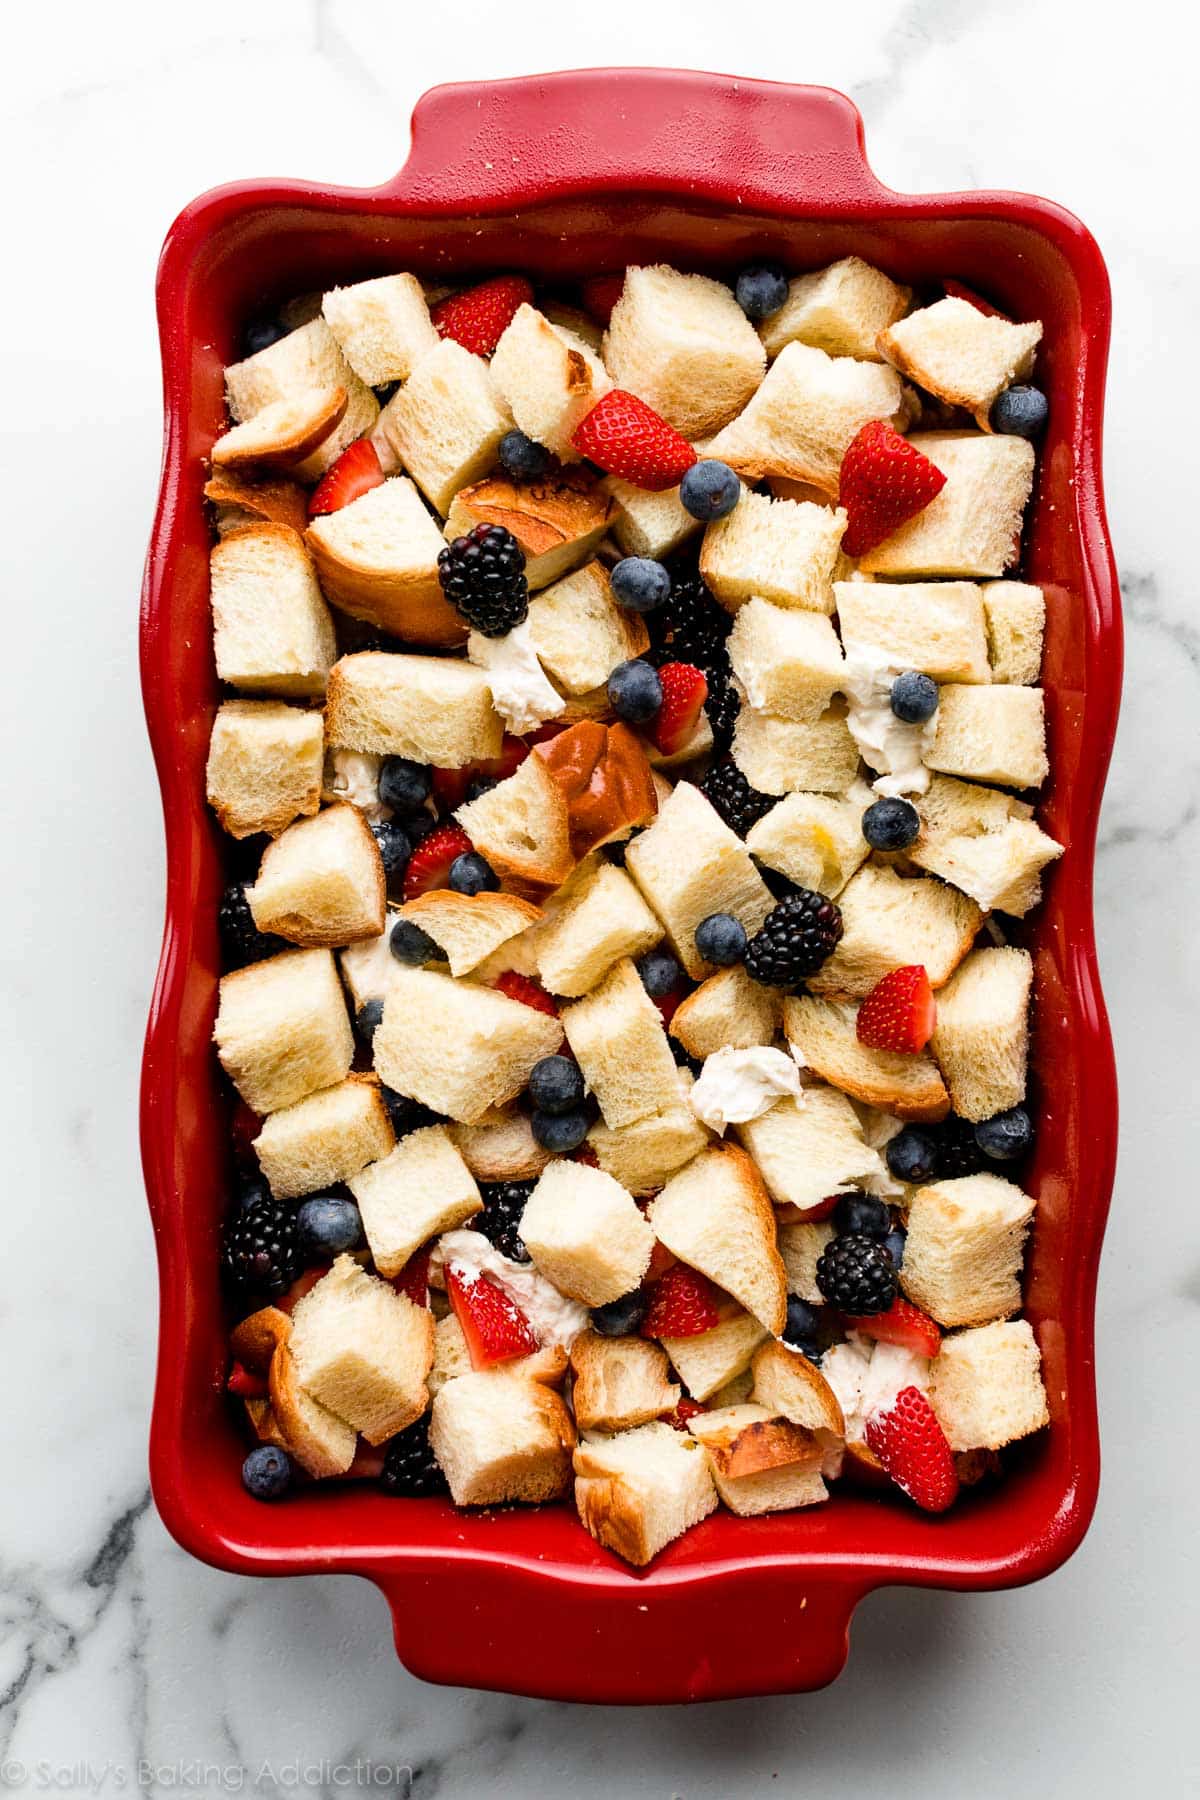 Berries French toast in a red frying pan before baking